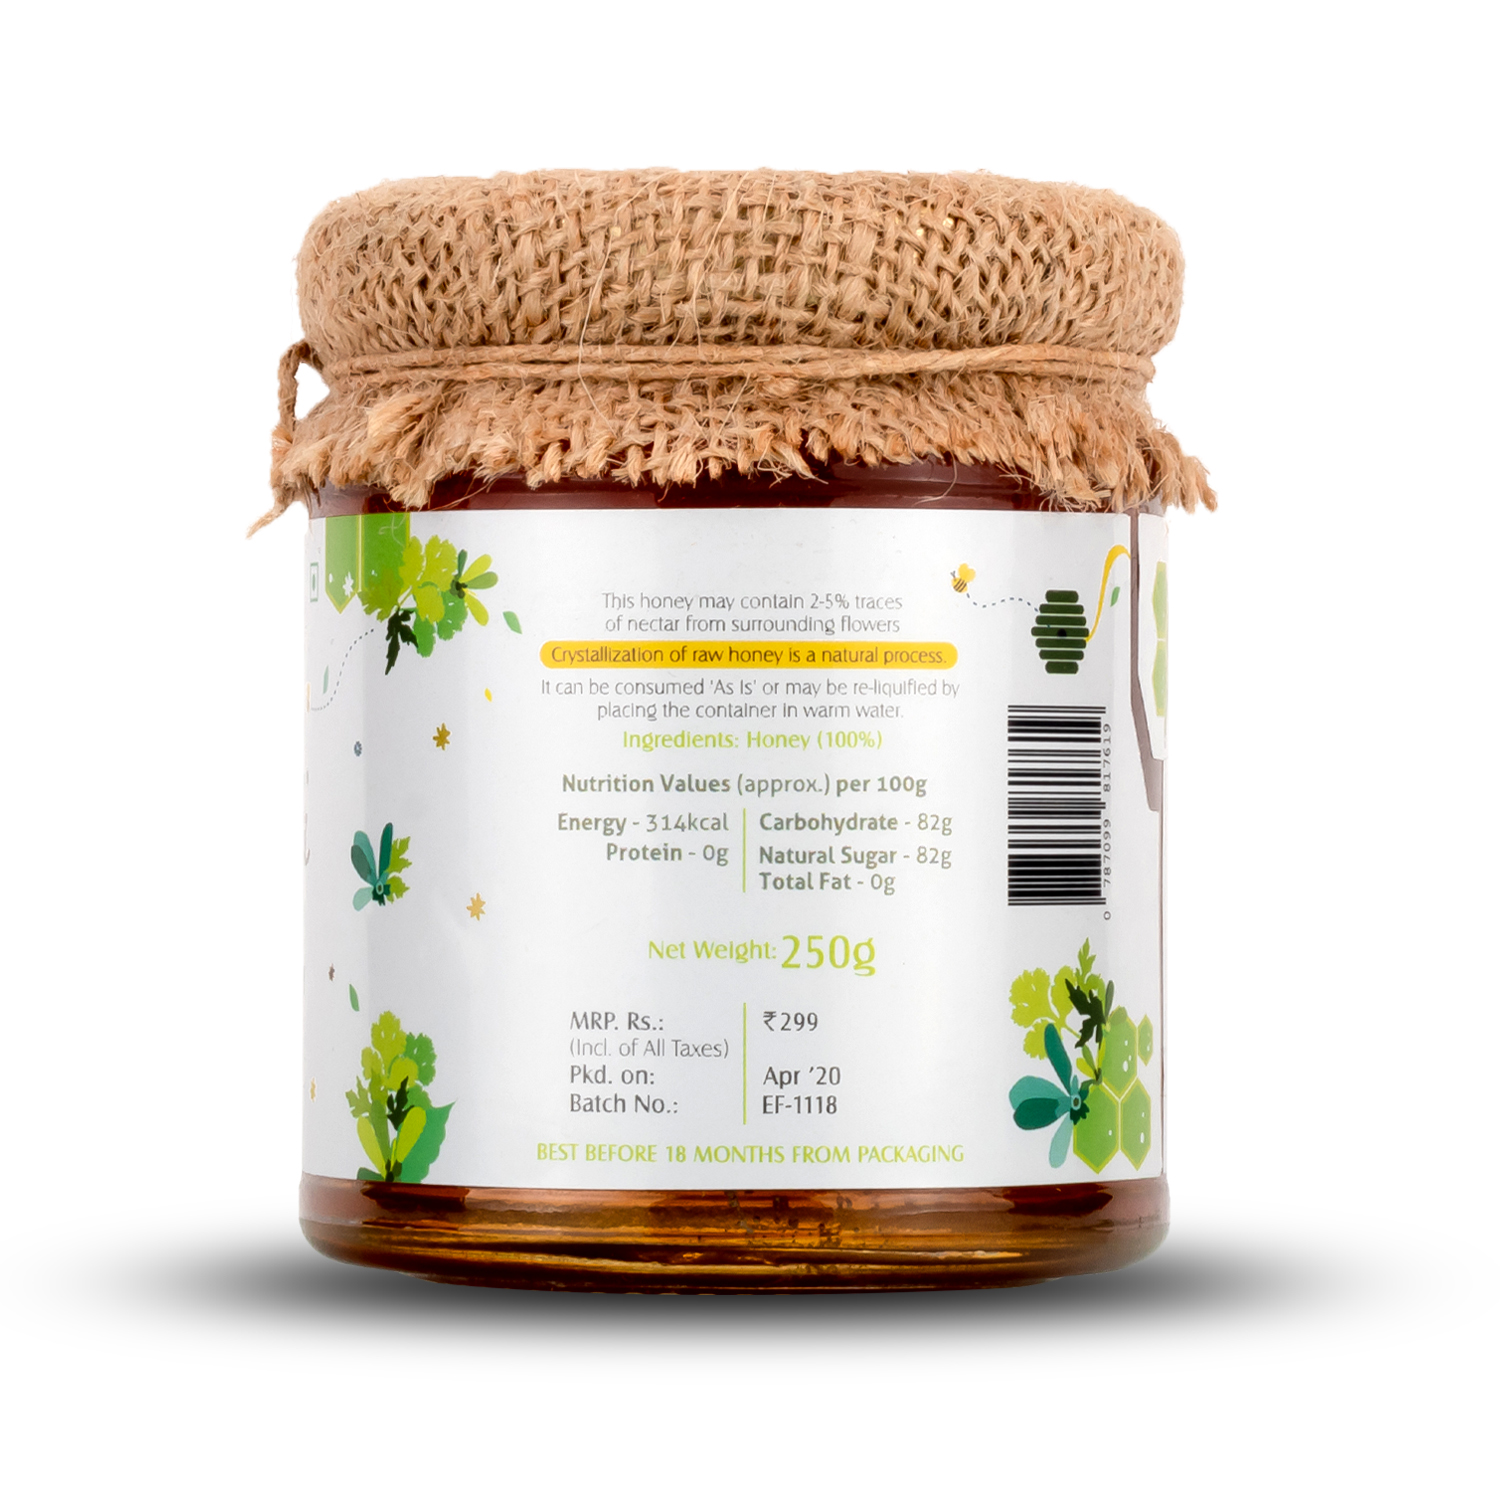 Buy HoneyVeda Natural Coriander Raw Mono Floral Honey Unprocessed and Unpasteurized (250 Grams) at Best Price Online